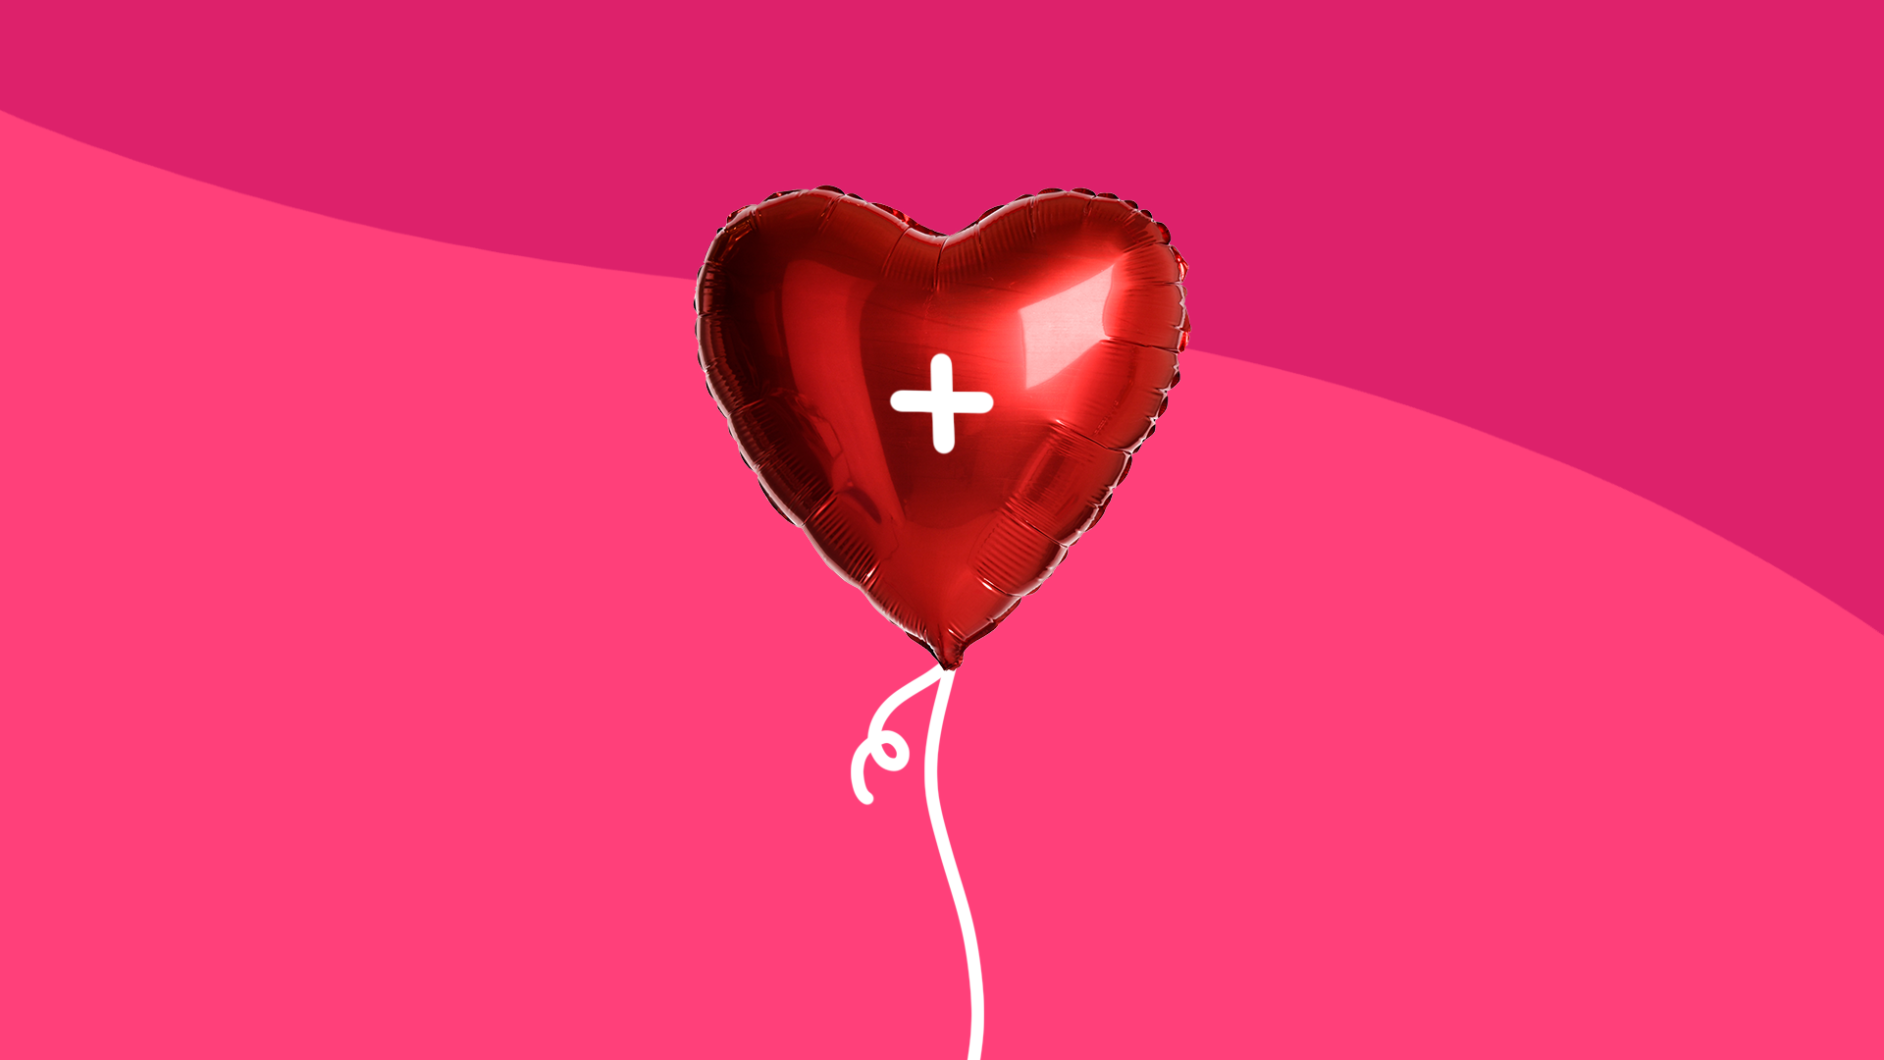 https://www.singlecare.com/blog/wp-content/uploads/2020/09/normal-heart-rate-1884x1060.png